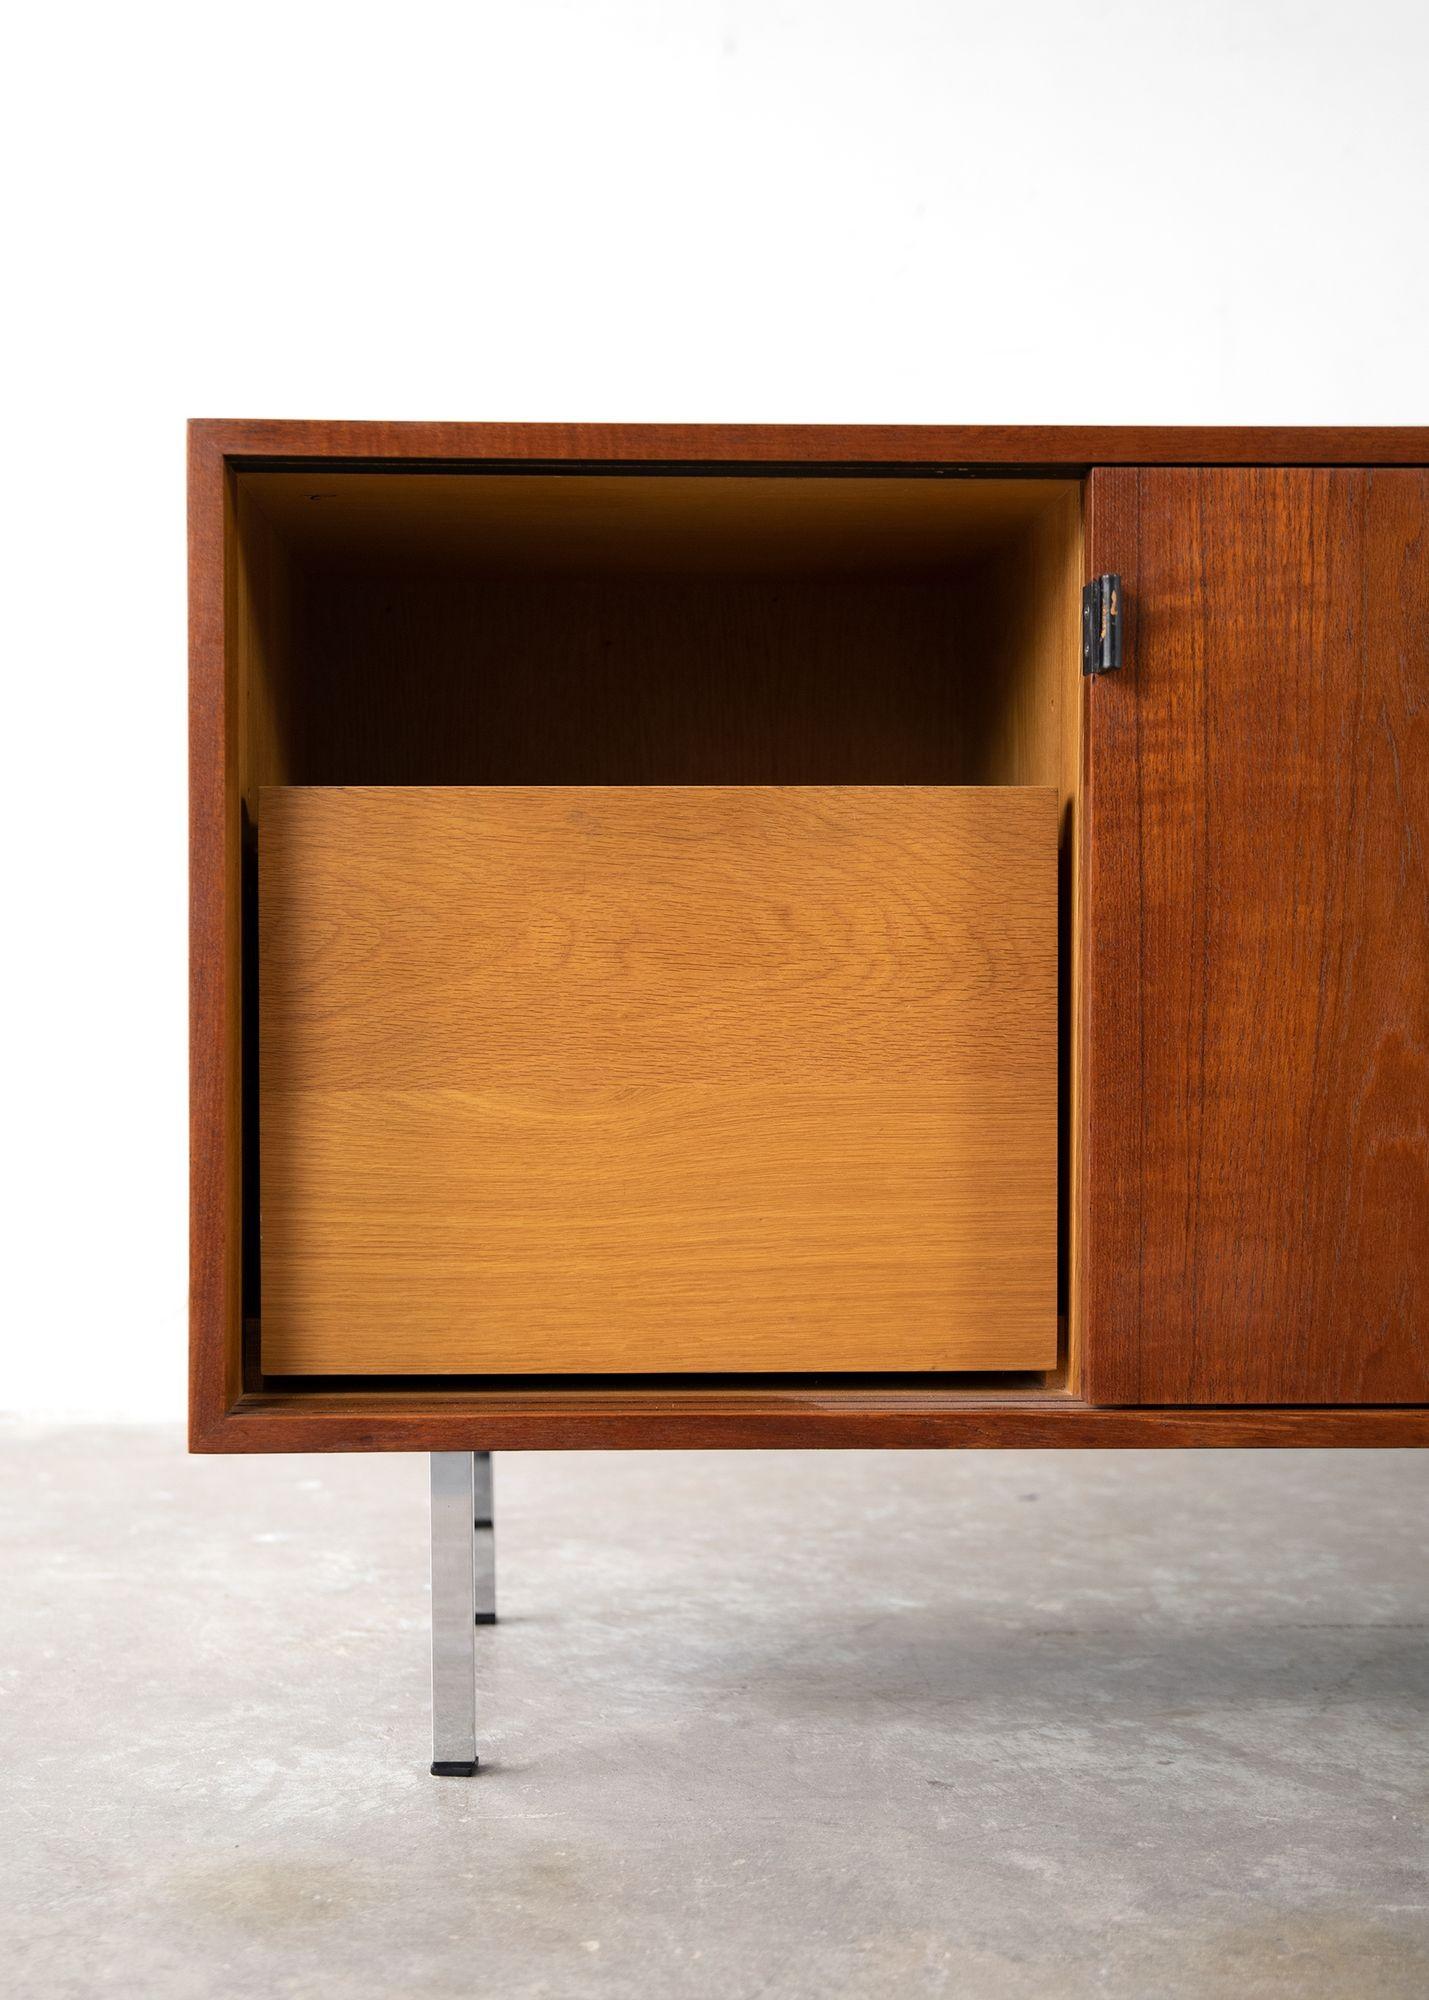 American Florence Knoll Credenza in Teak and Oak with Chrome Legs and Leather Pulls